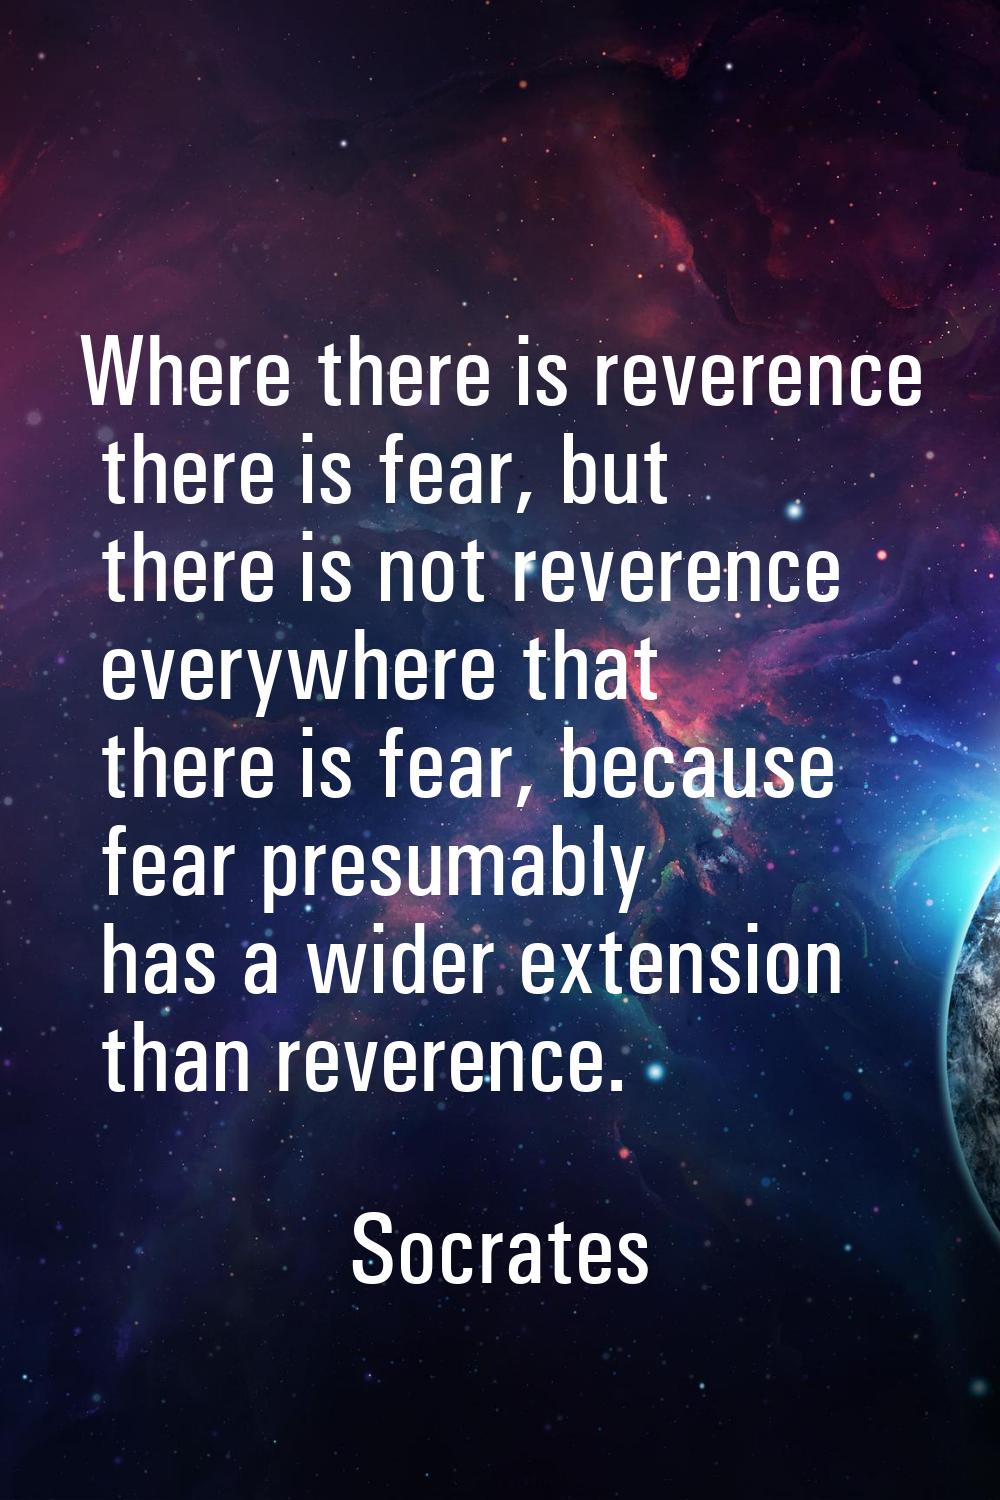 Where there is reverence there is fear, but there is not reverence everywhere that there is fear, b